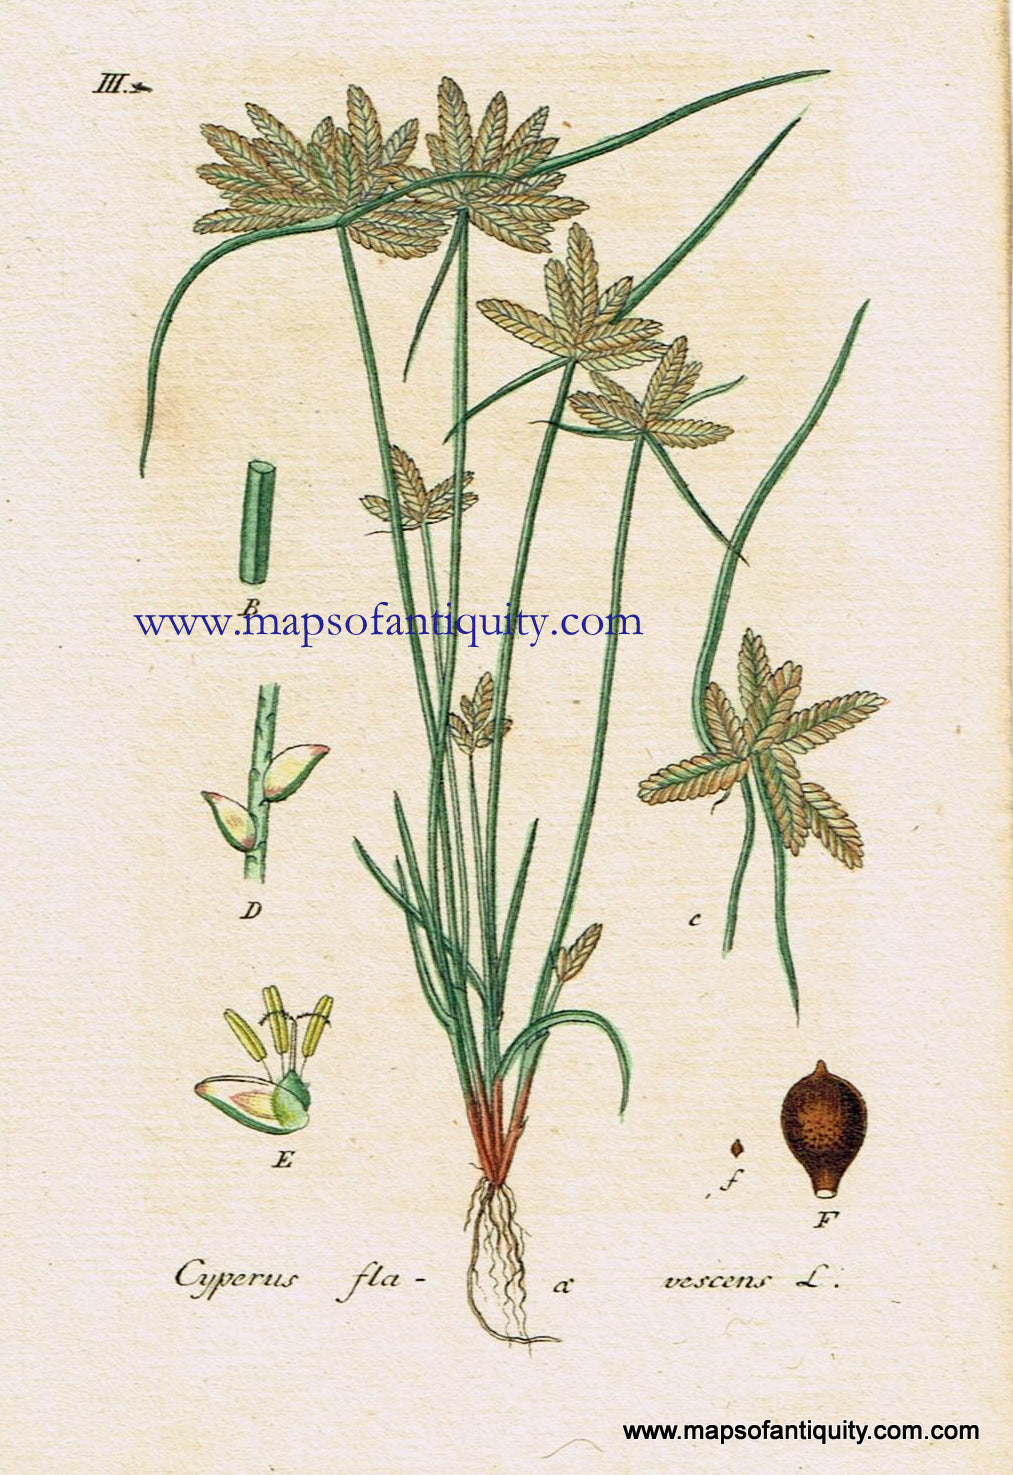 Antique-Hand-Colored-Botanical-Print-Cyperus-flavescens-L.-or-Yellow-Nutsedge-or-Yellow-Nut-Grass-Botanical-Illustration-Antique-Prints--Natural-History-Botanical-1828-Jacob-Sturm-Maps-Of-Antiquity